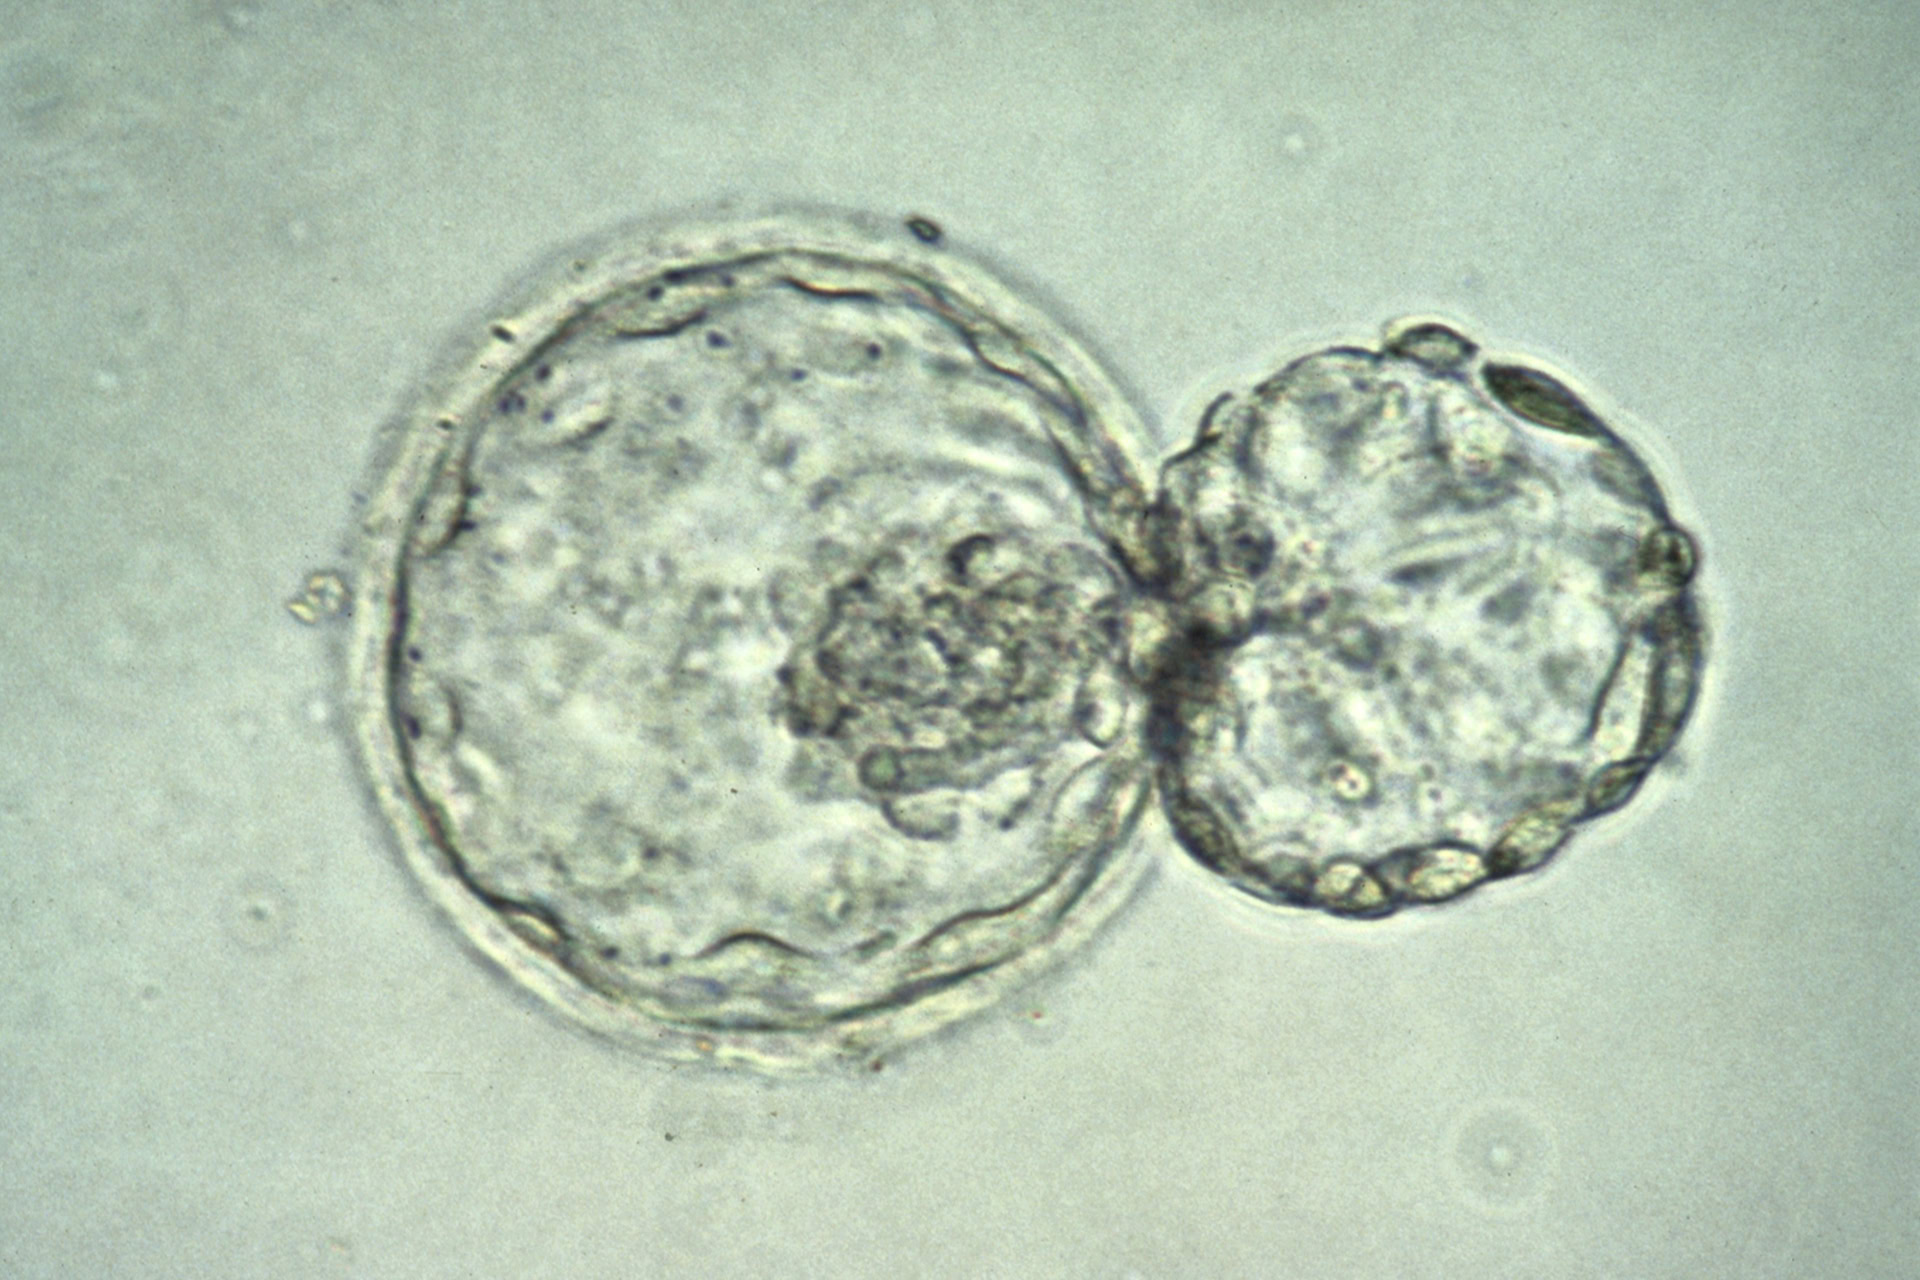 Image by K Hardy via the Wellcome Collection. Depicts a human embryo at the blastocyst stage (about six days after fertilisation) 'hatching' out of the zona pellucida.